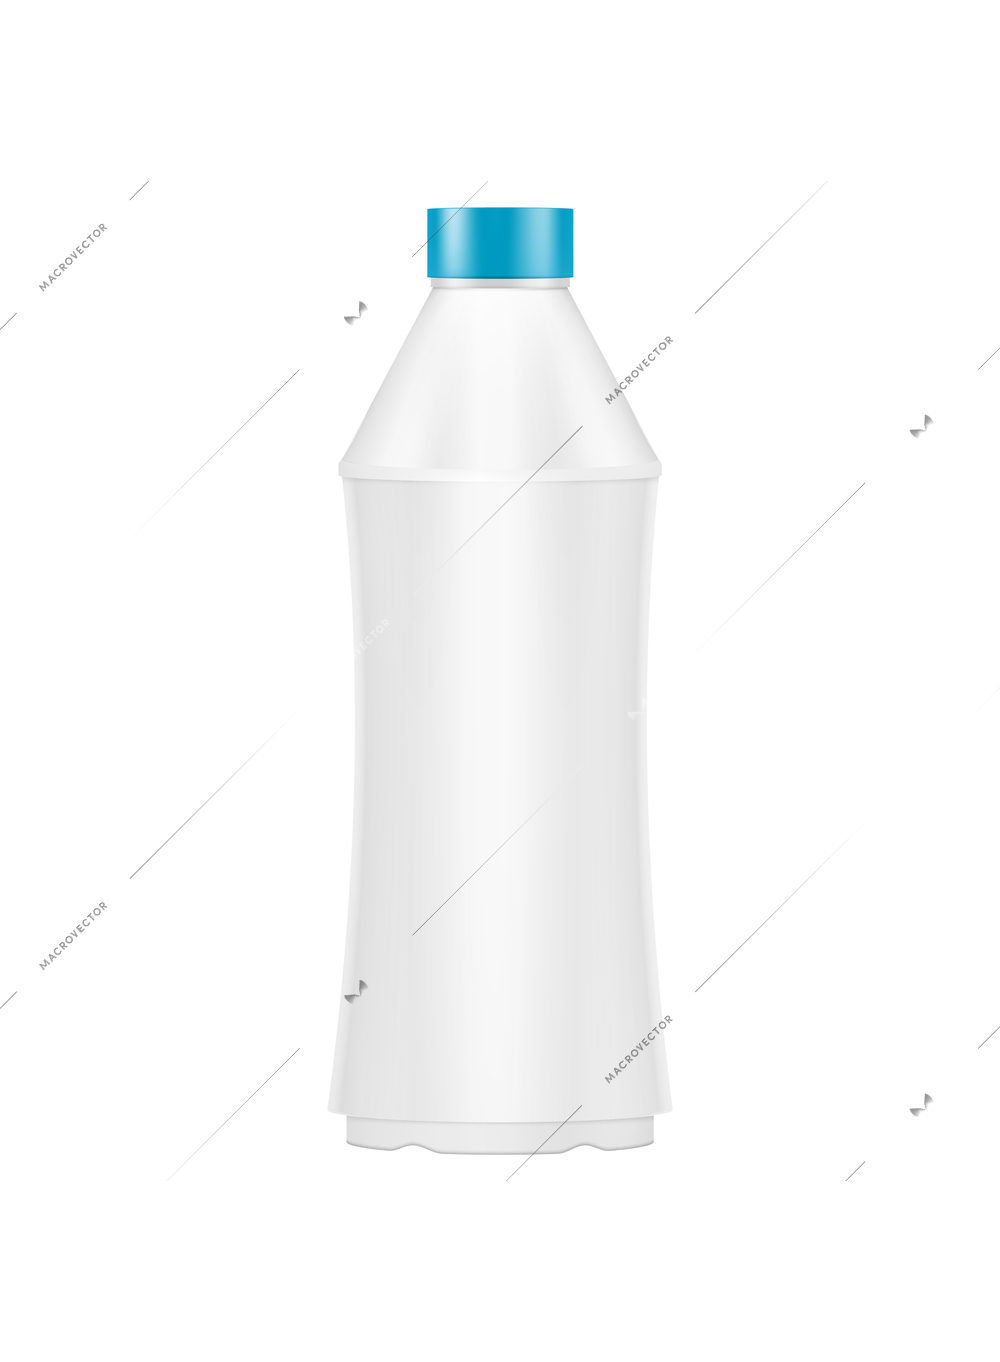 Detergent bottles transparent composition with isolated realistic image of empty plastic jar vector illustration